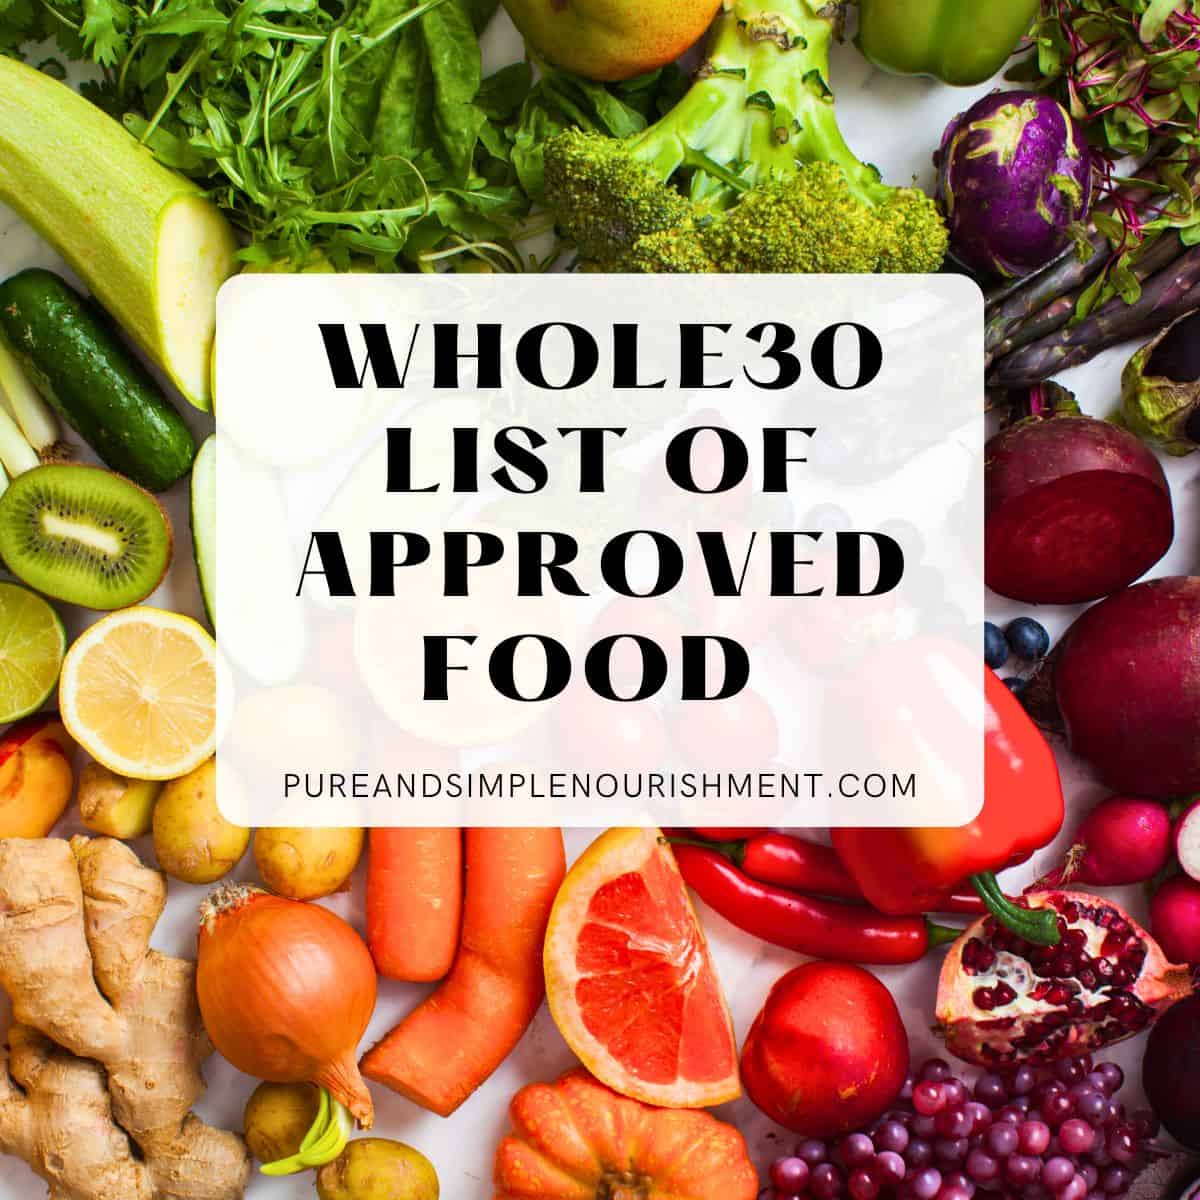 A bunch of different fruits and vegetables with the title "Whole30 list of approved food" over them. 